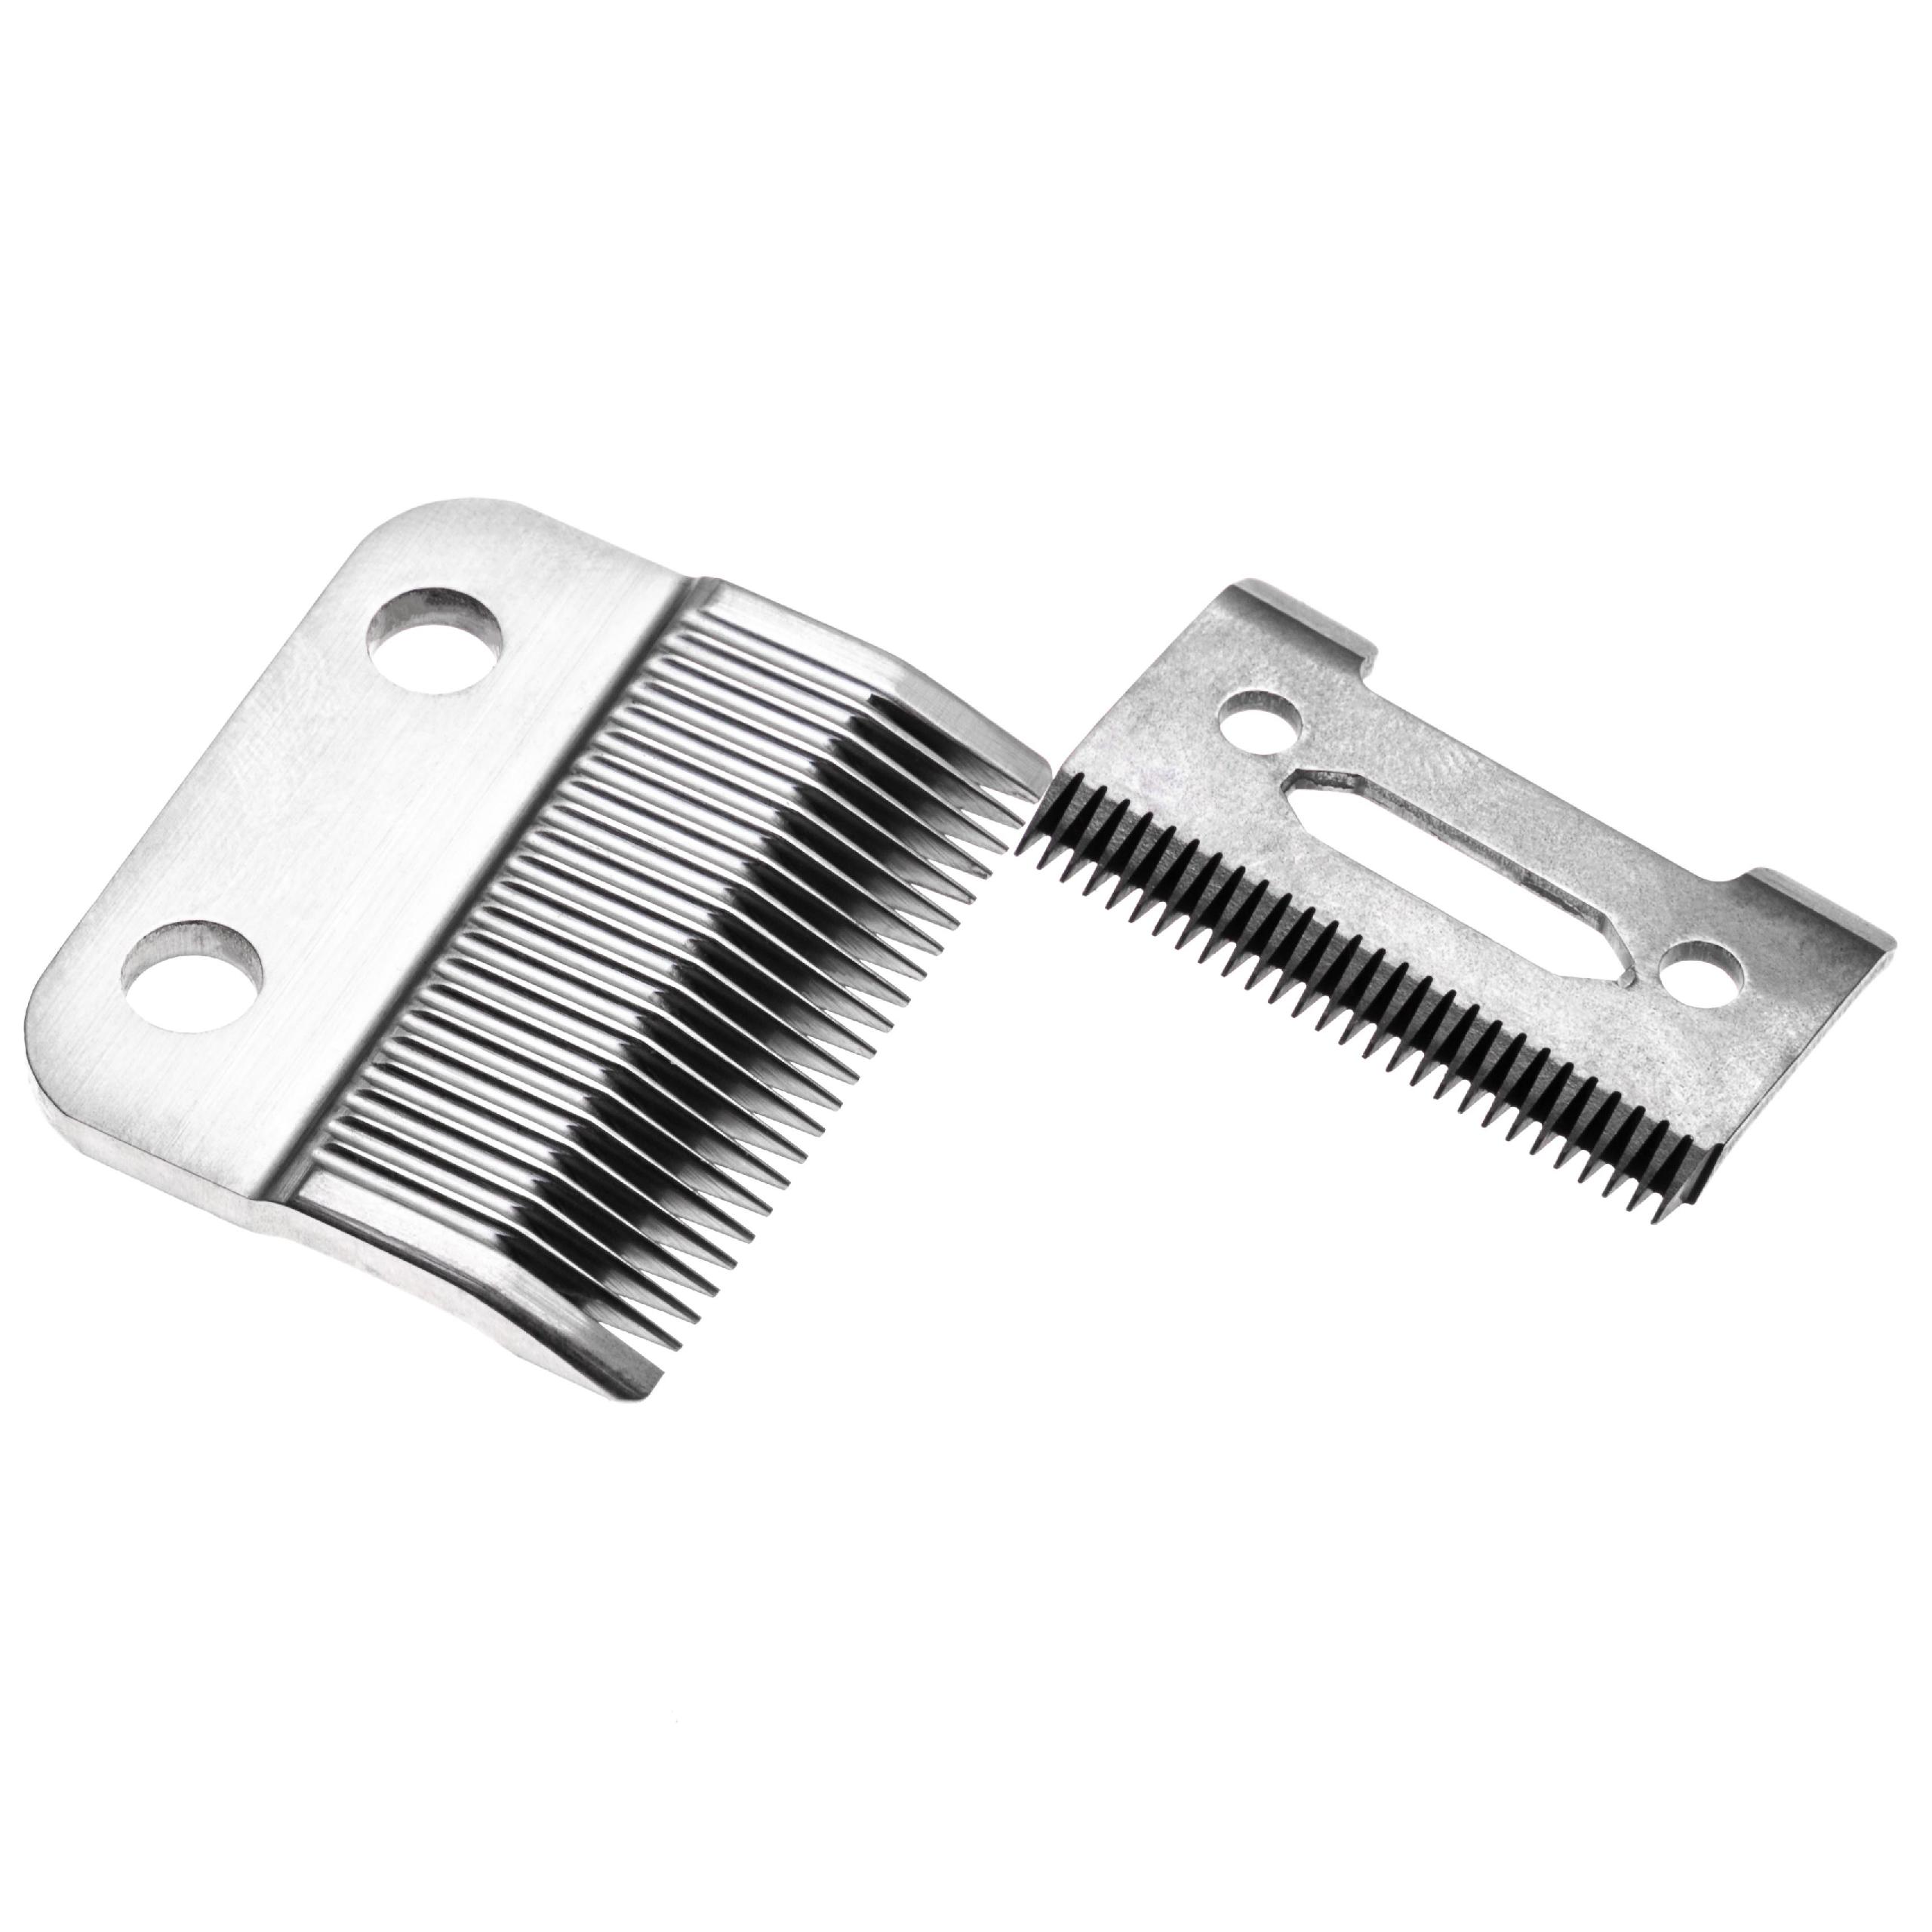 vhbw Cutting Set 2x Blade Replacement for Wahl WA2470-050, WA2050-500 for Hair Clippers